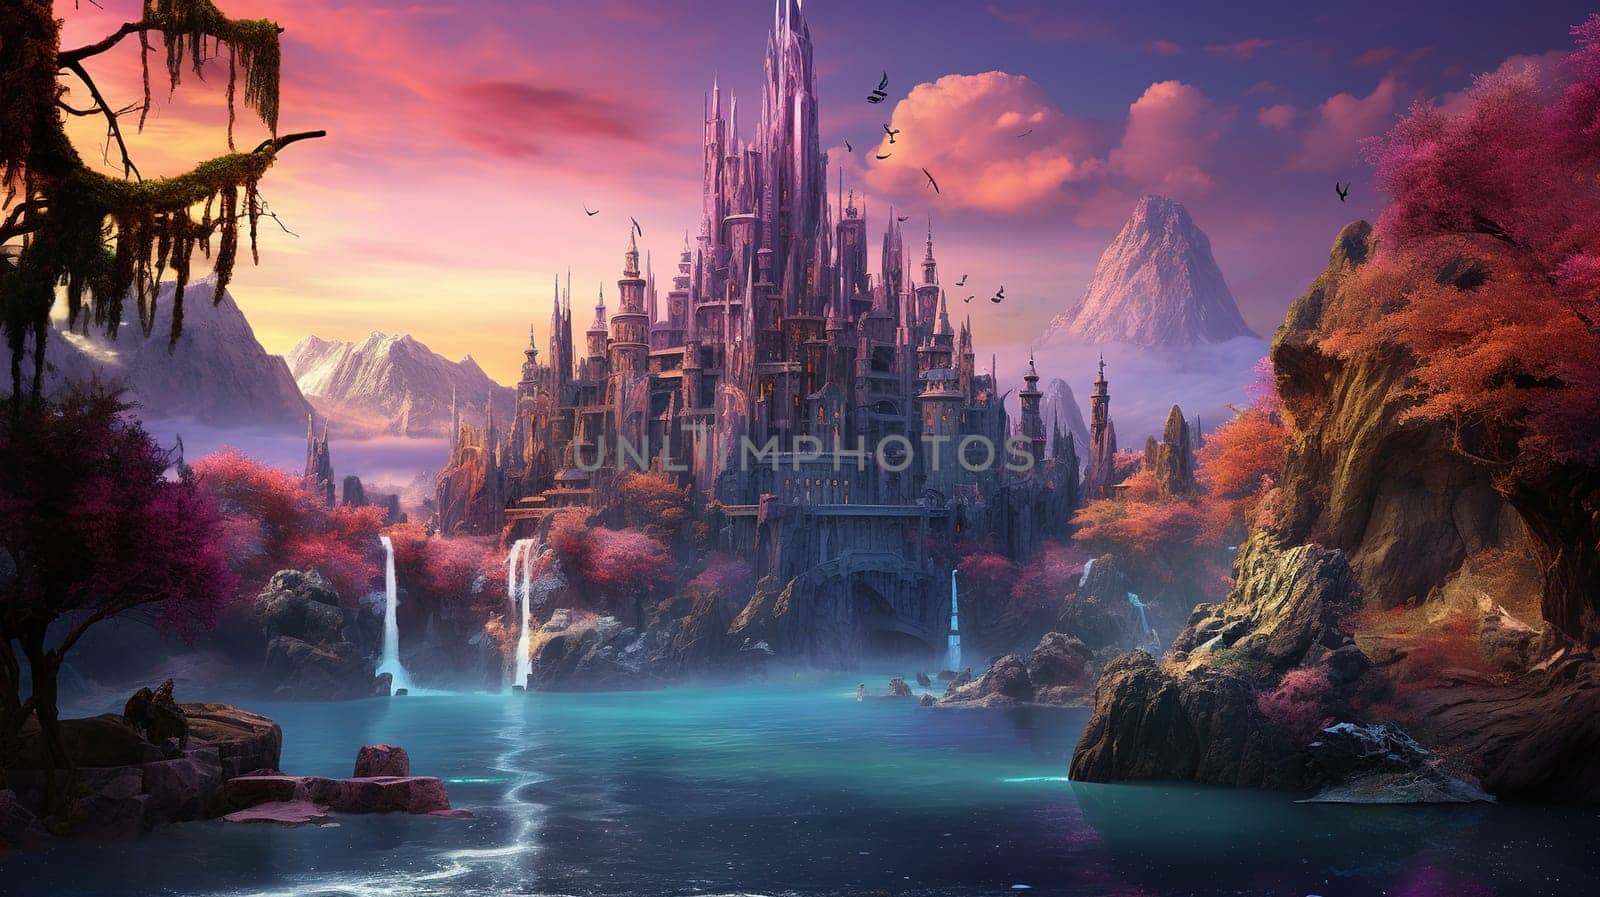 Narnia world with abstract and beautiful nature and objects with colorful effects, abstraction nature and wildlife